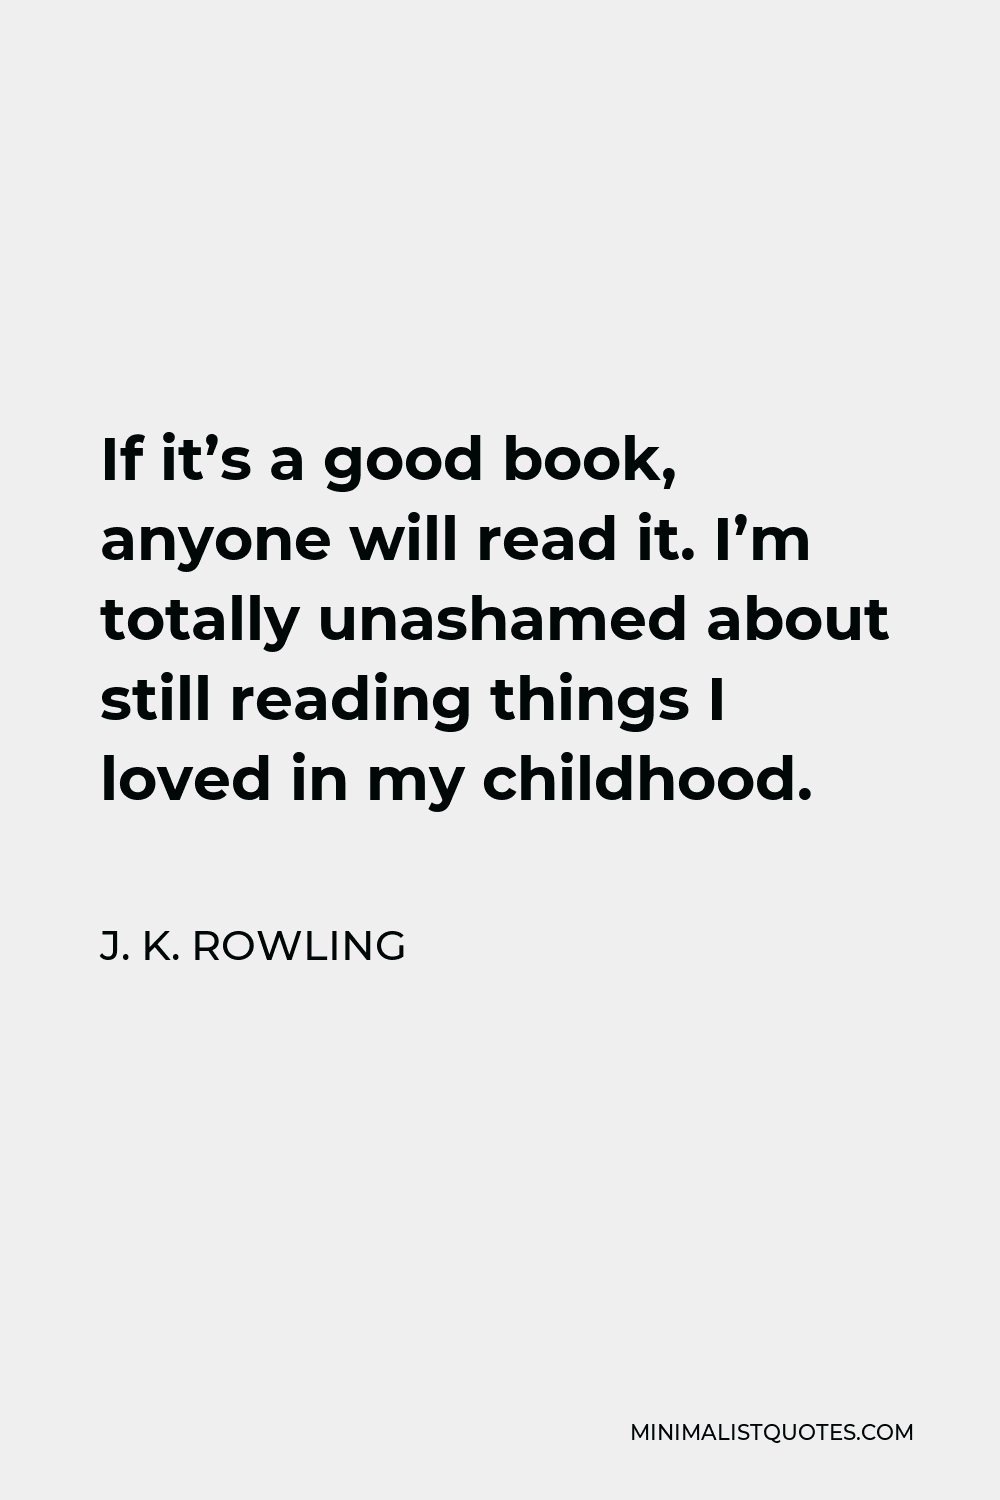 J. K. Rowling Quote - If it’s a good book, anyone will read it. I’m totally unashamed about still reading things I loved in my childhood.